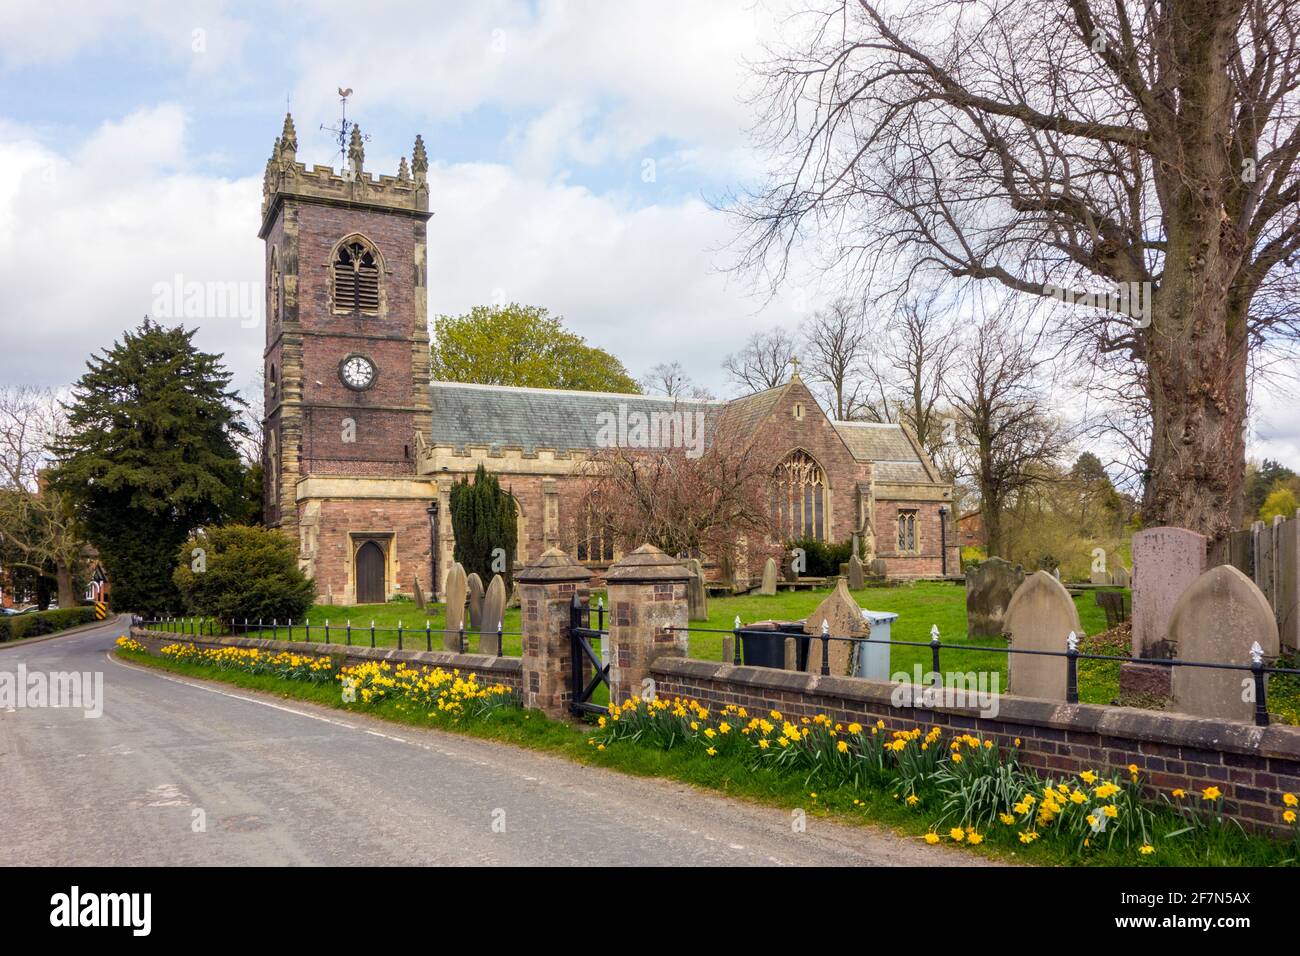 St Leonard's Church and churchyard  in the village of Warmingham near Crewe Cheshire  in the springtime with daffodills Stock Photo